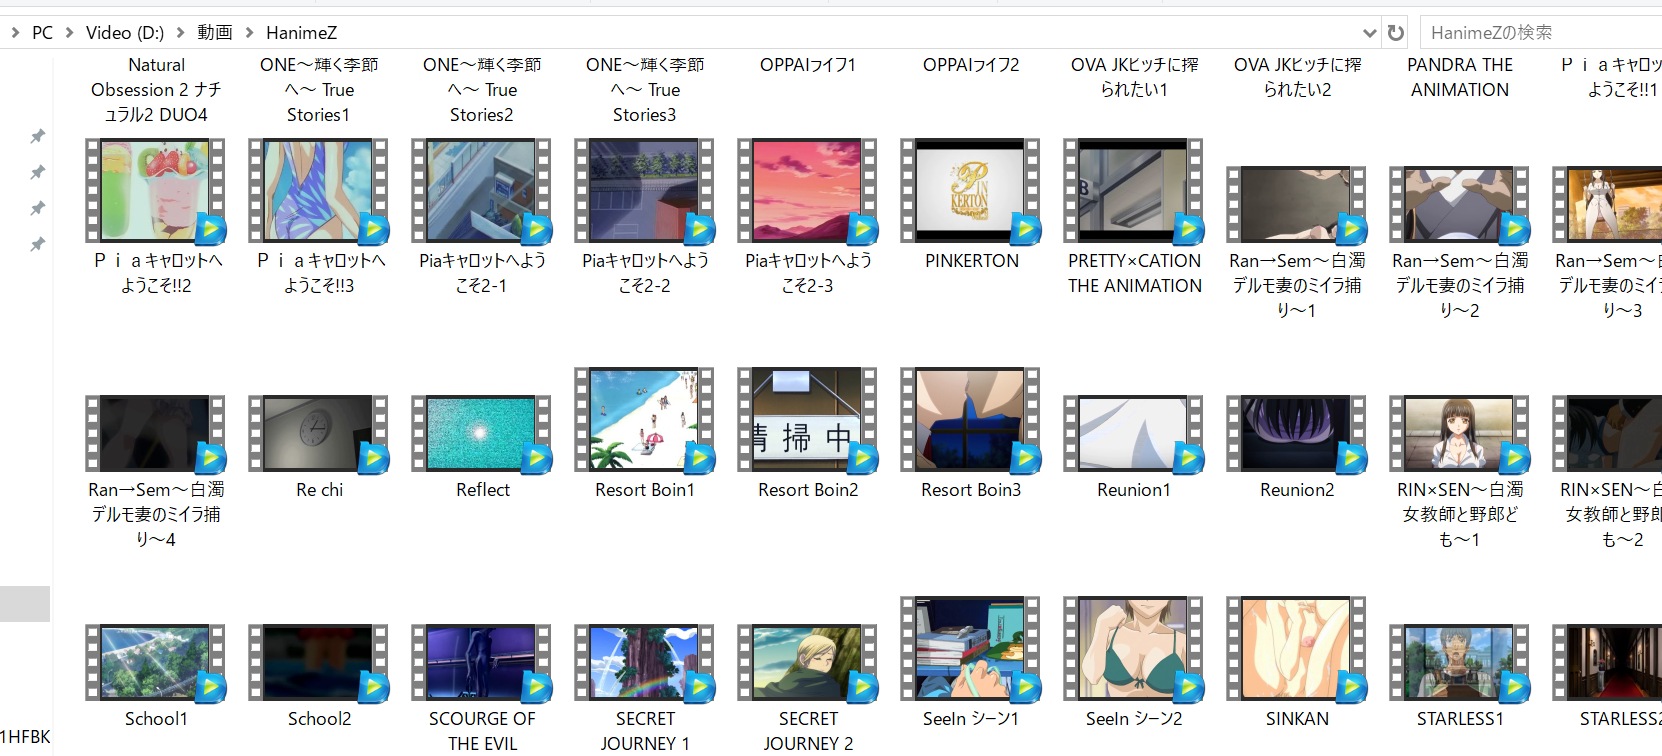 some of the hentai I downloaded and obtained from HanimeZ